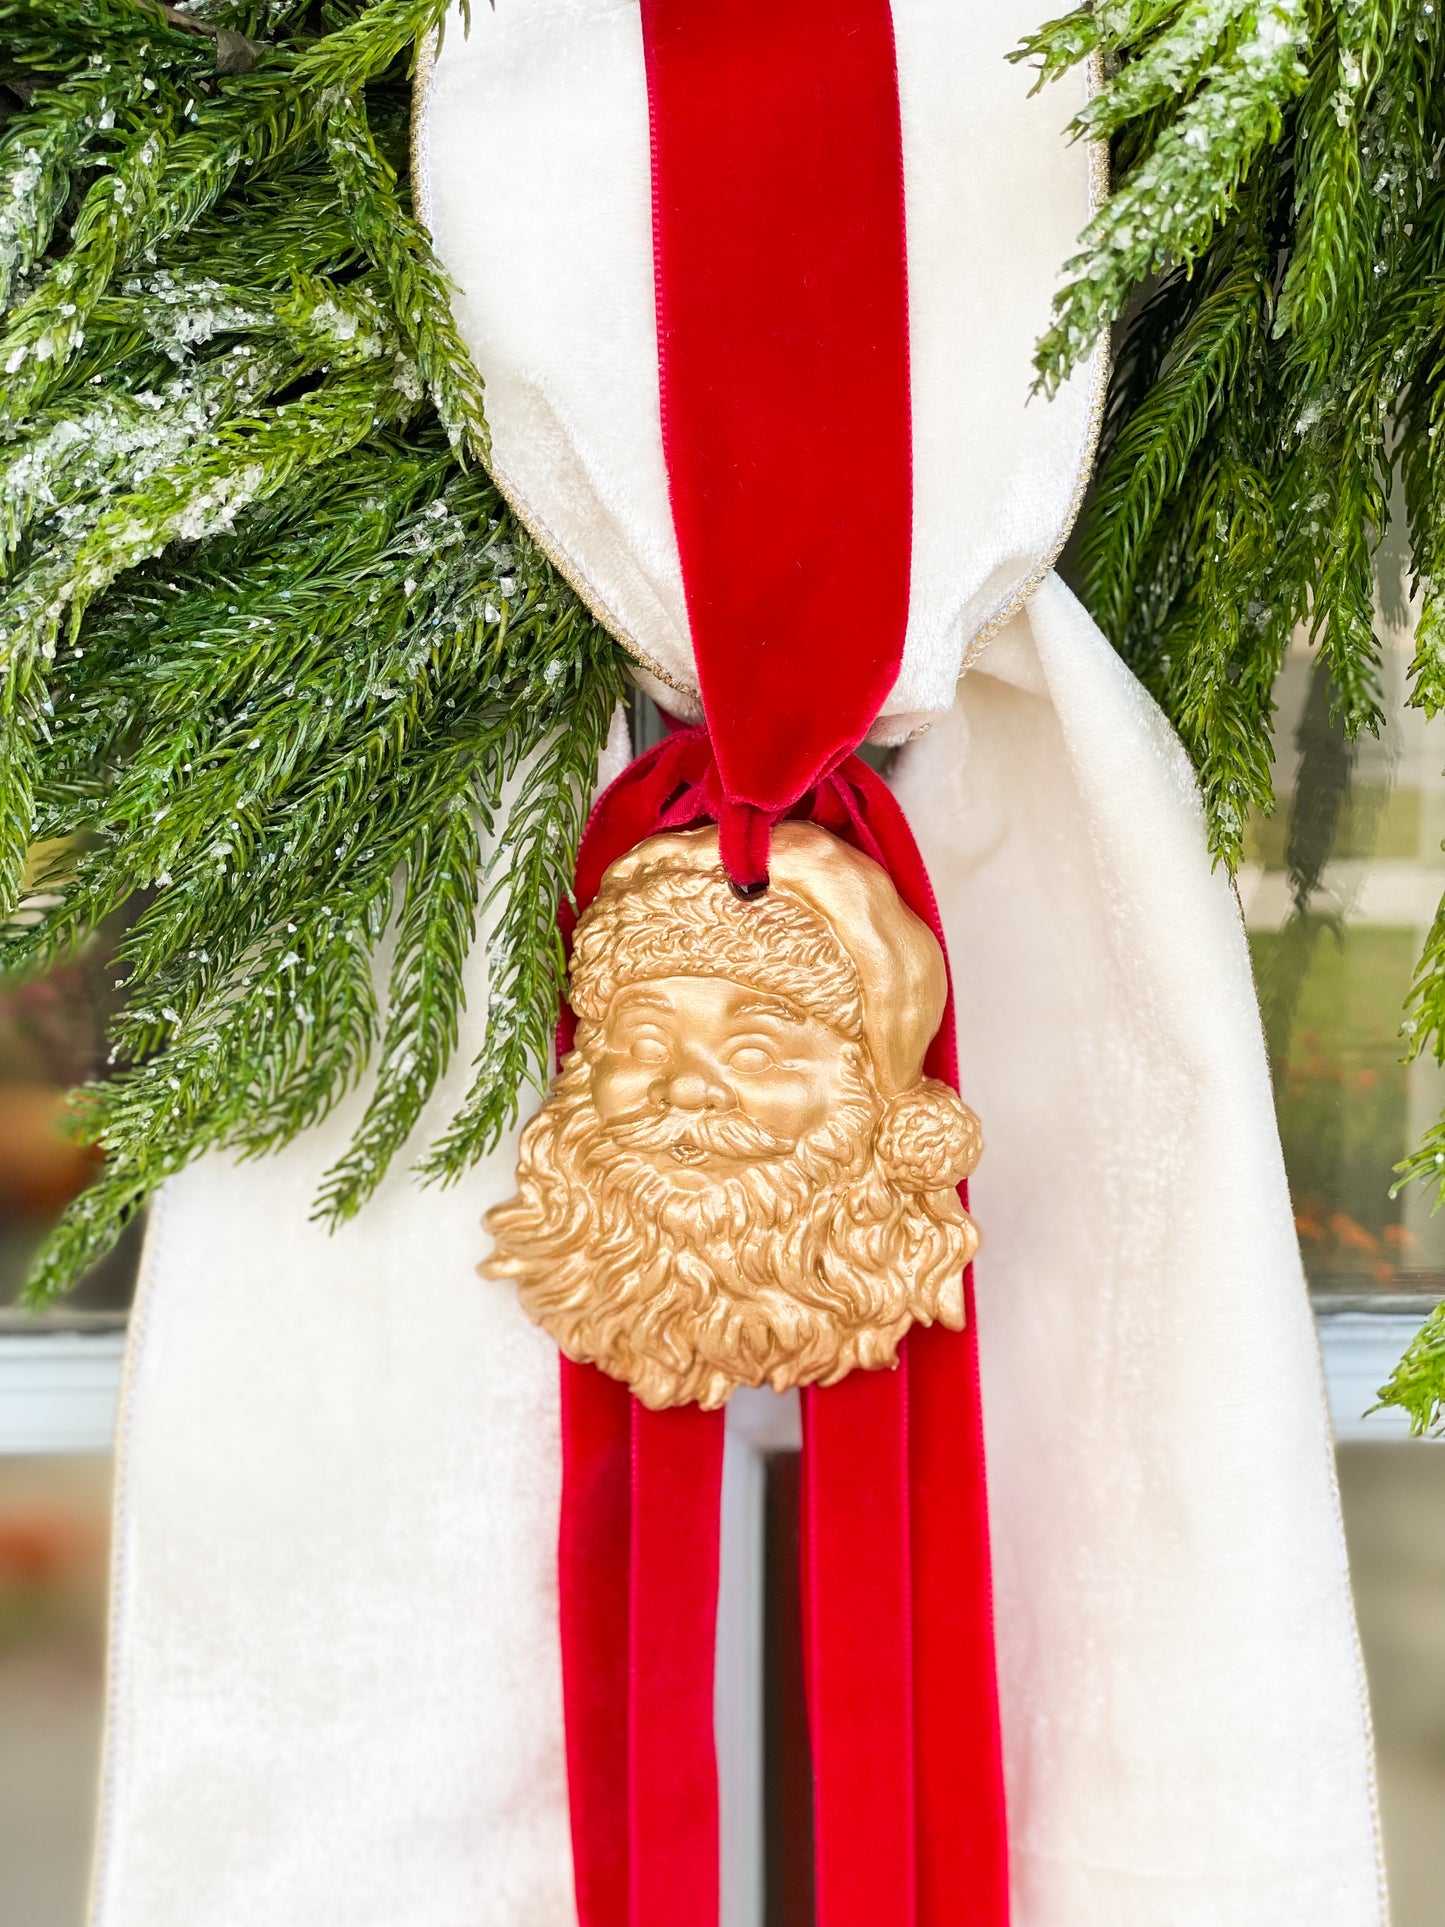 The White Believe Iced Fir Pine Wreath With Sash And Santa